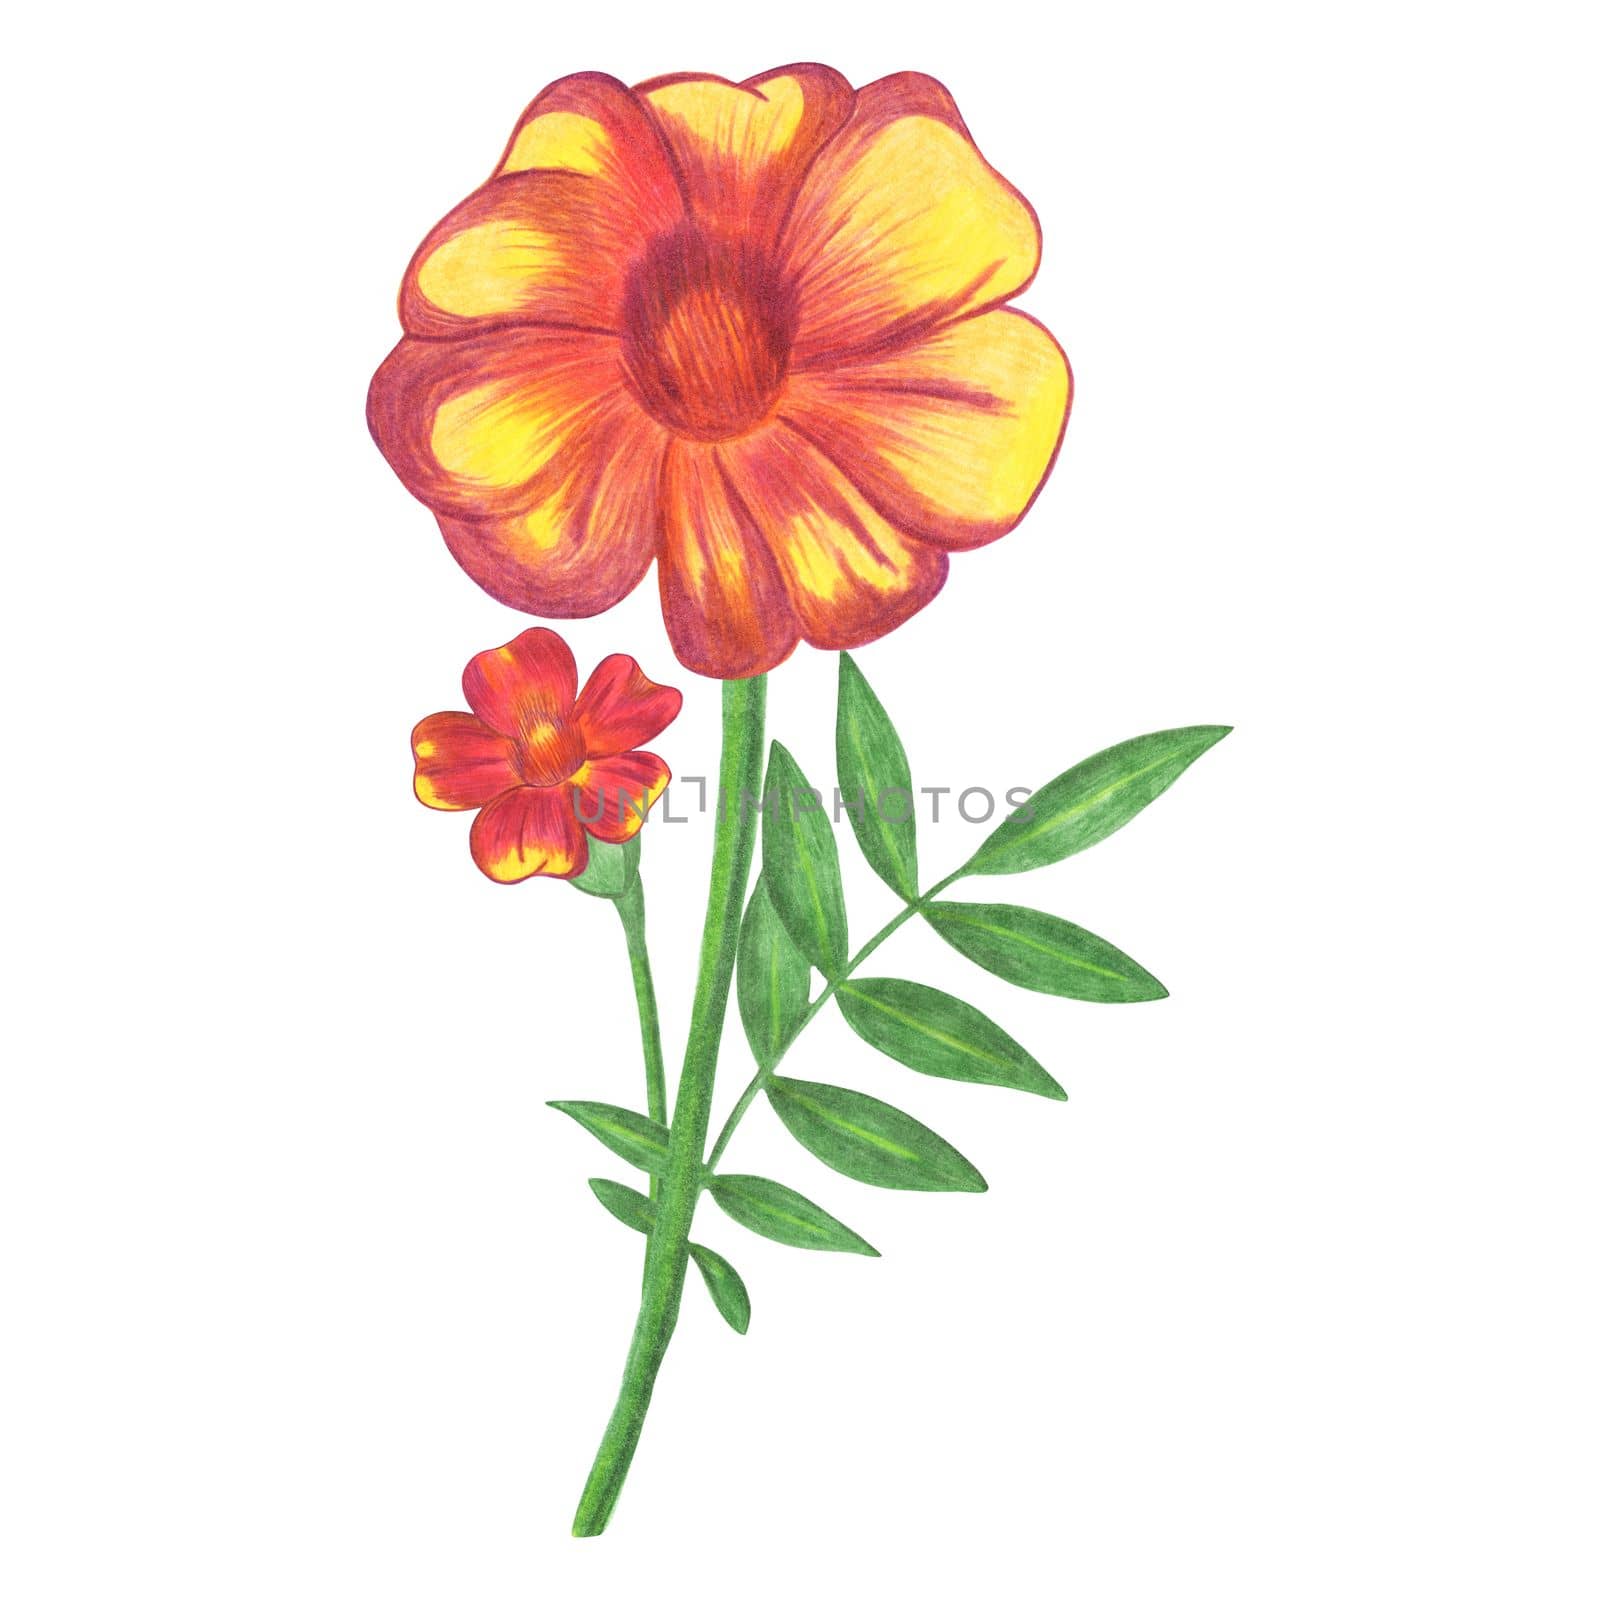 Hand Drawn Red Marigold with Green Leaves Isolated on White Background. by Rina_Dozornaya